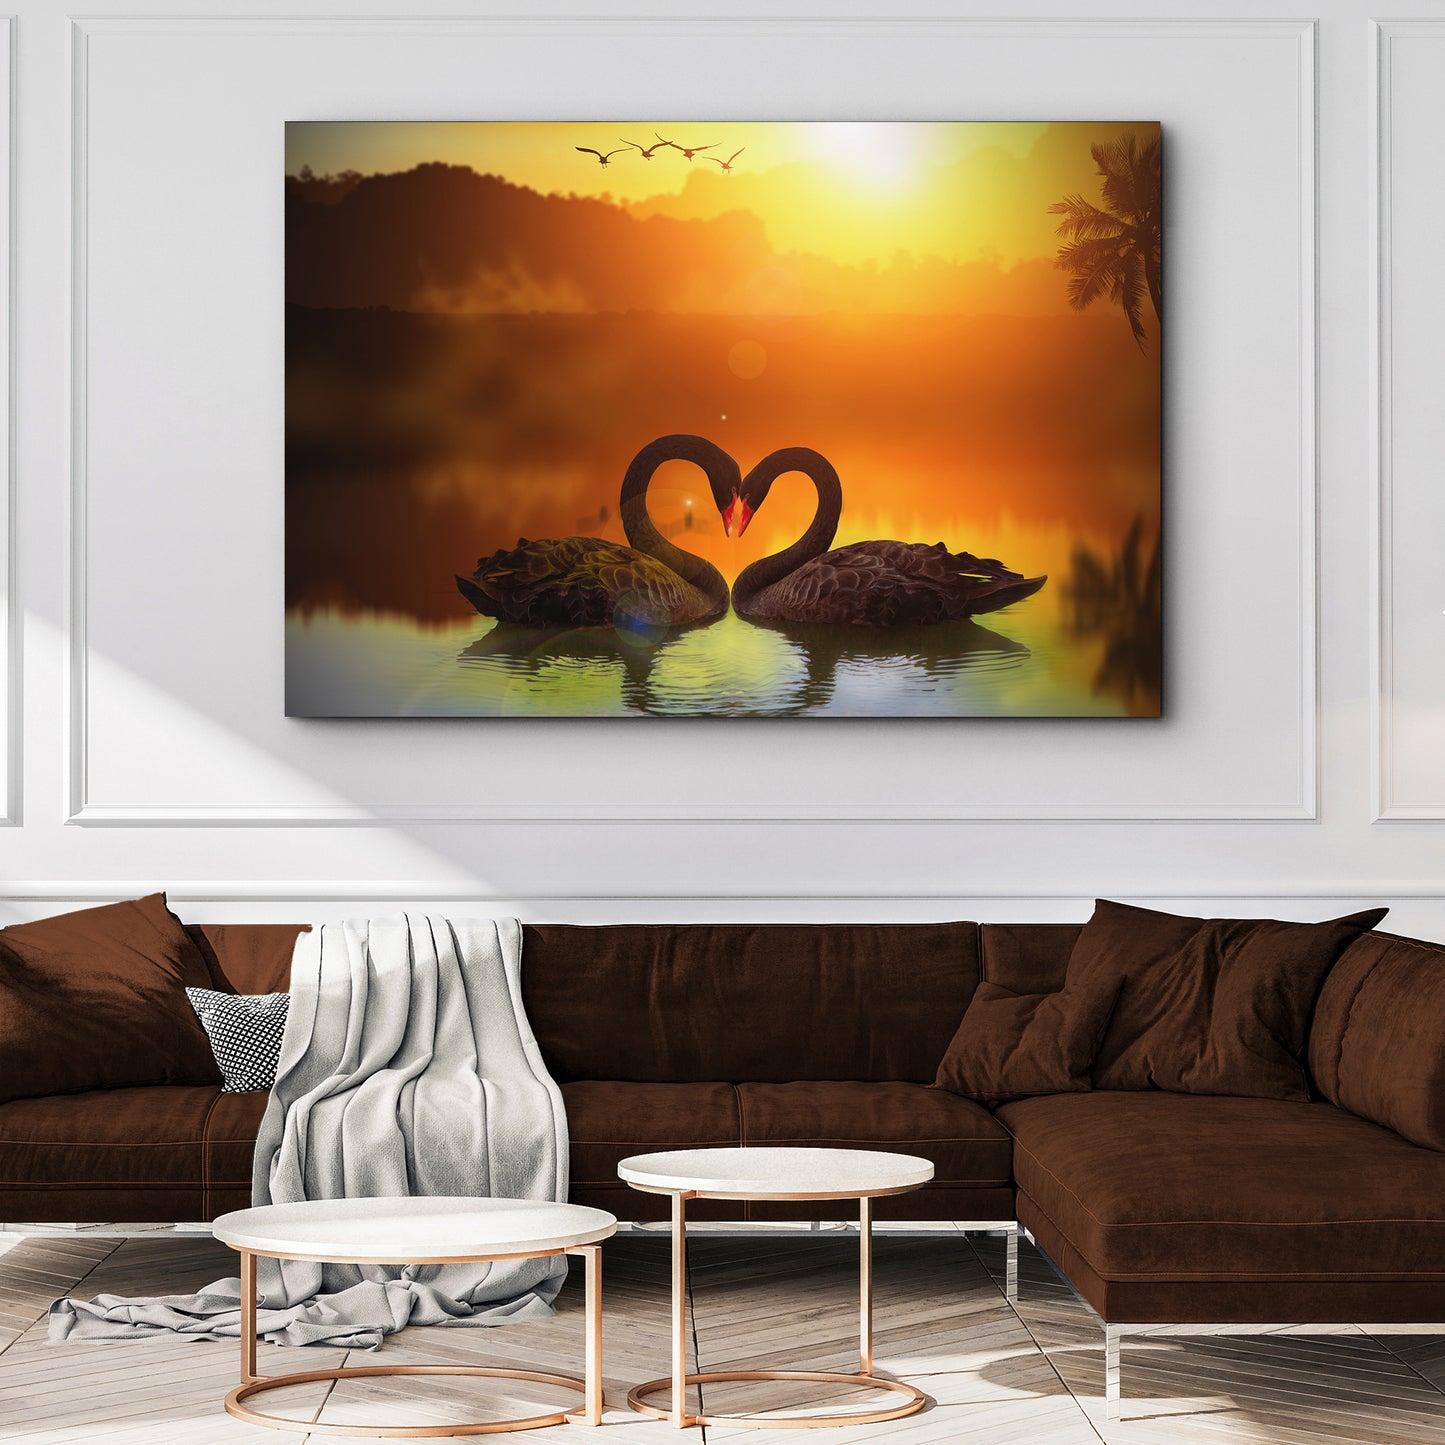 Romantic Swan at Sunset Canvas Wall Art - Image by Tailored Canvases